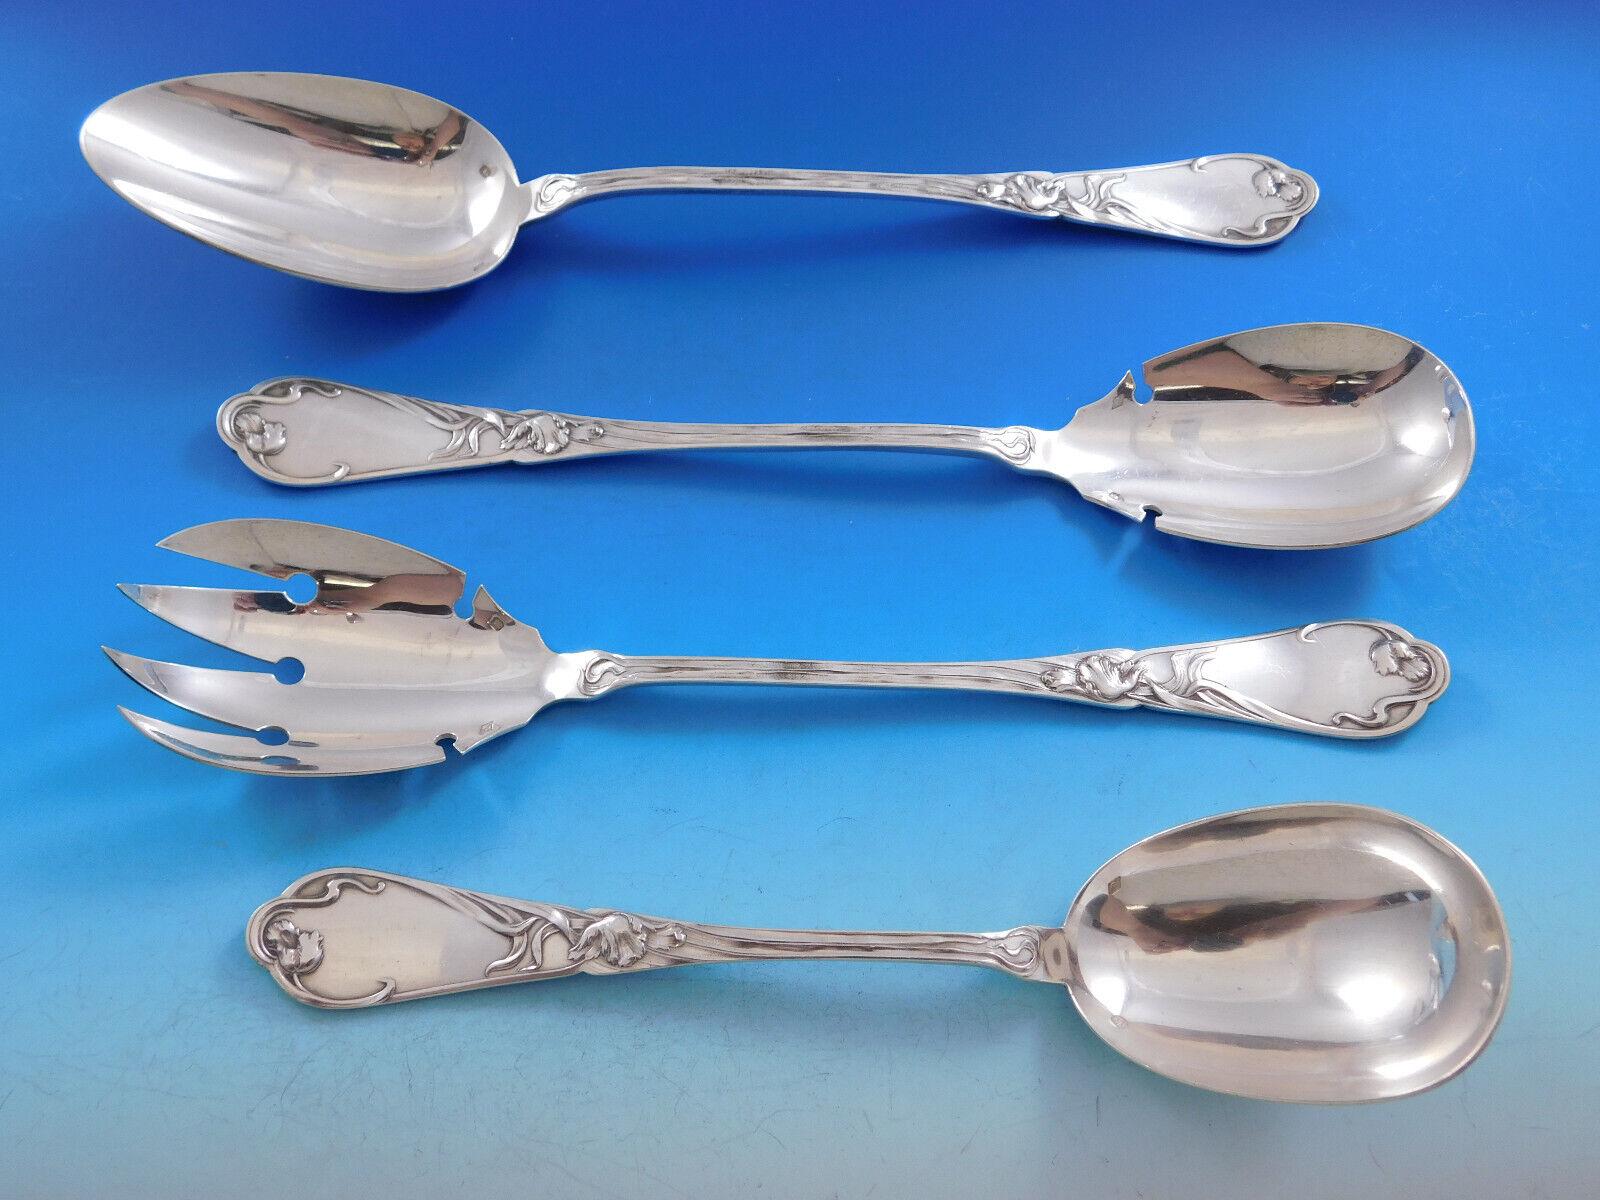 Tulipe Tulip by Boulenger French 950 Sterling Silver Flatware Service Set 214 pc For Sale 3